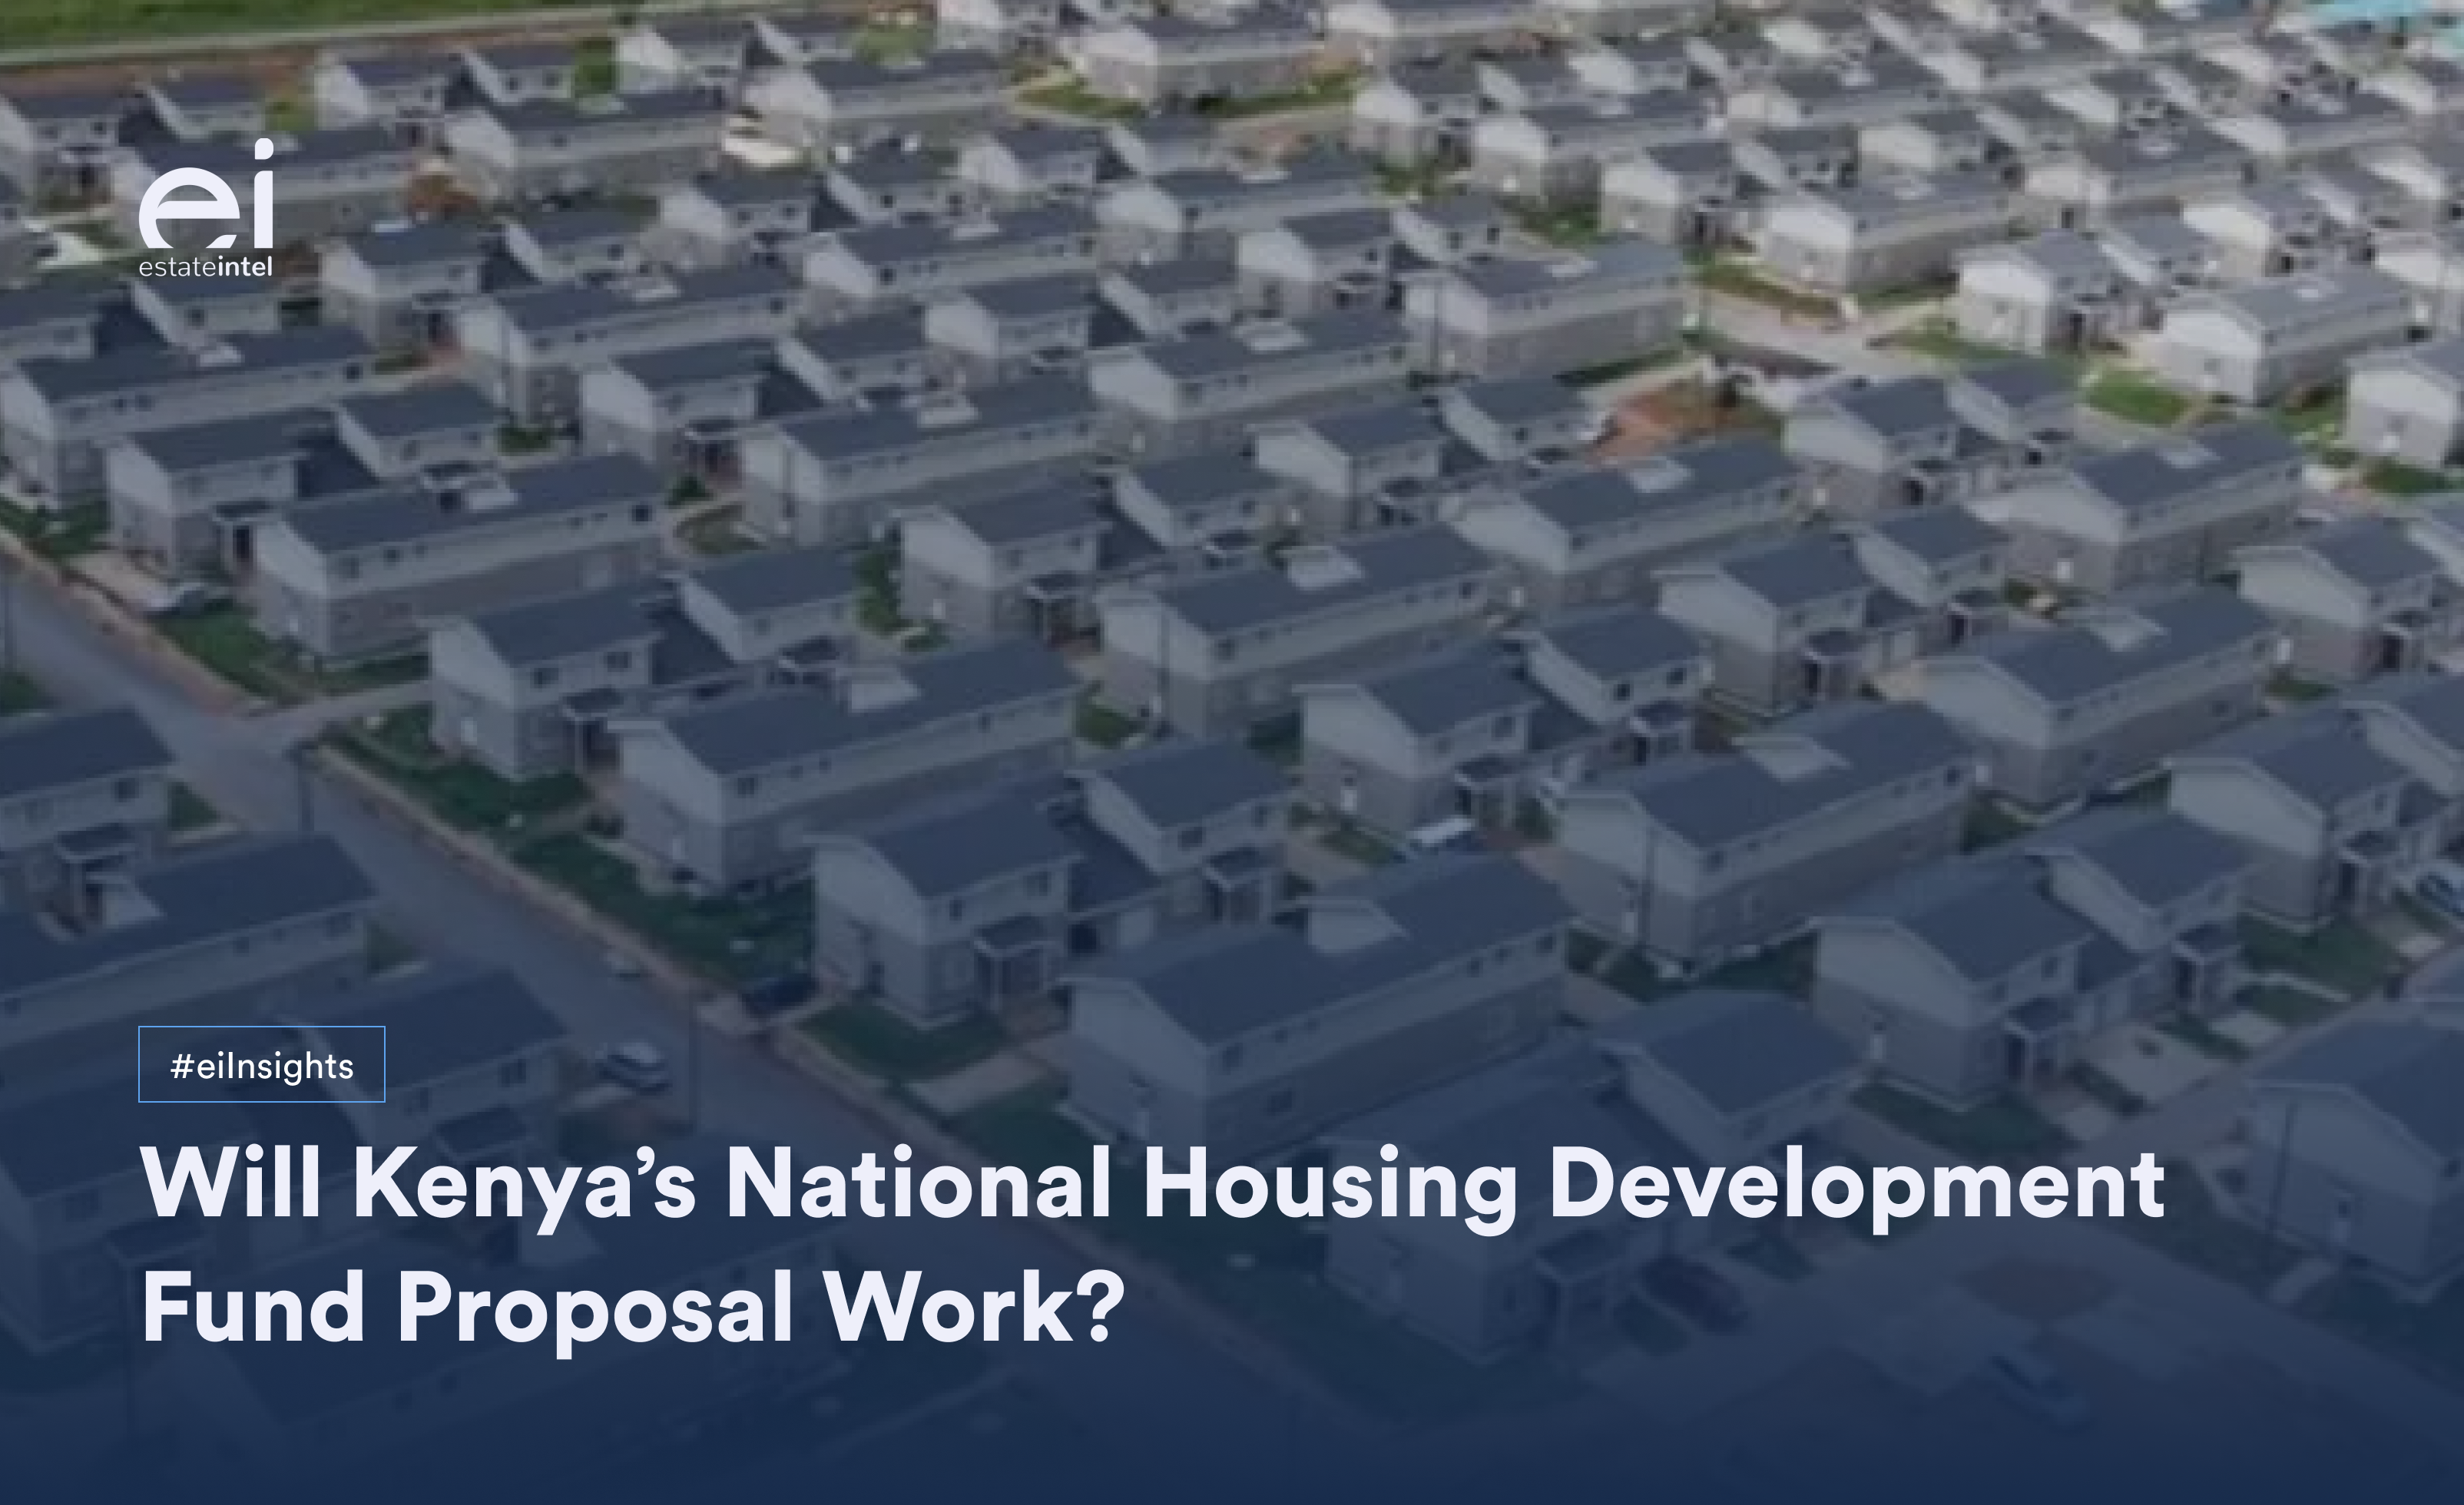 Kenya’s 2023 Finance Bill Proposal On The National Housing Development Fund (NHDF). Will It Work? And At What Cost?